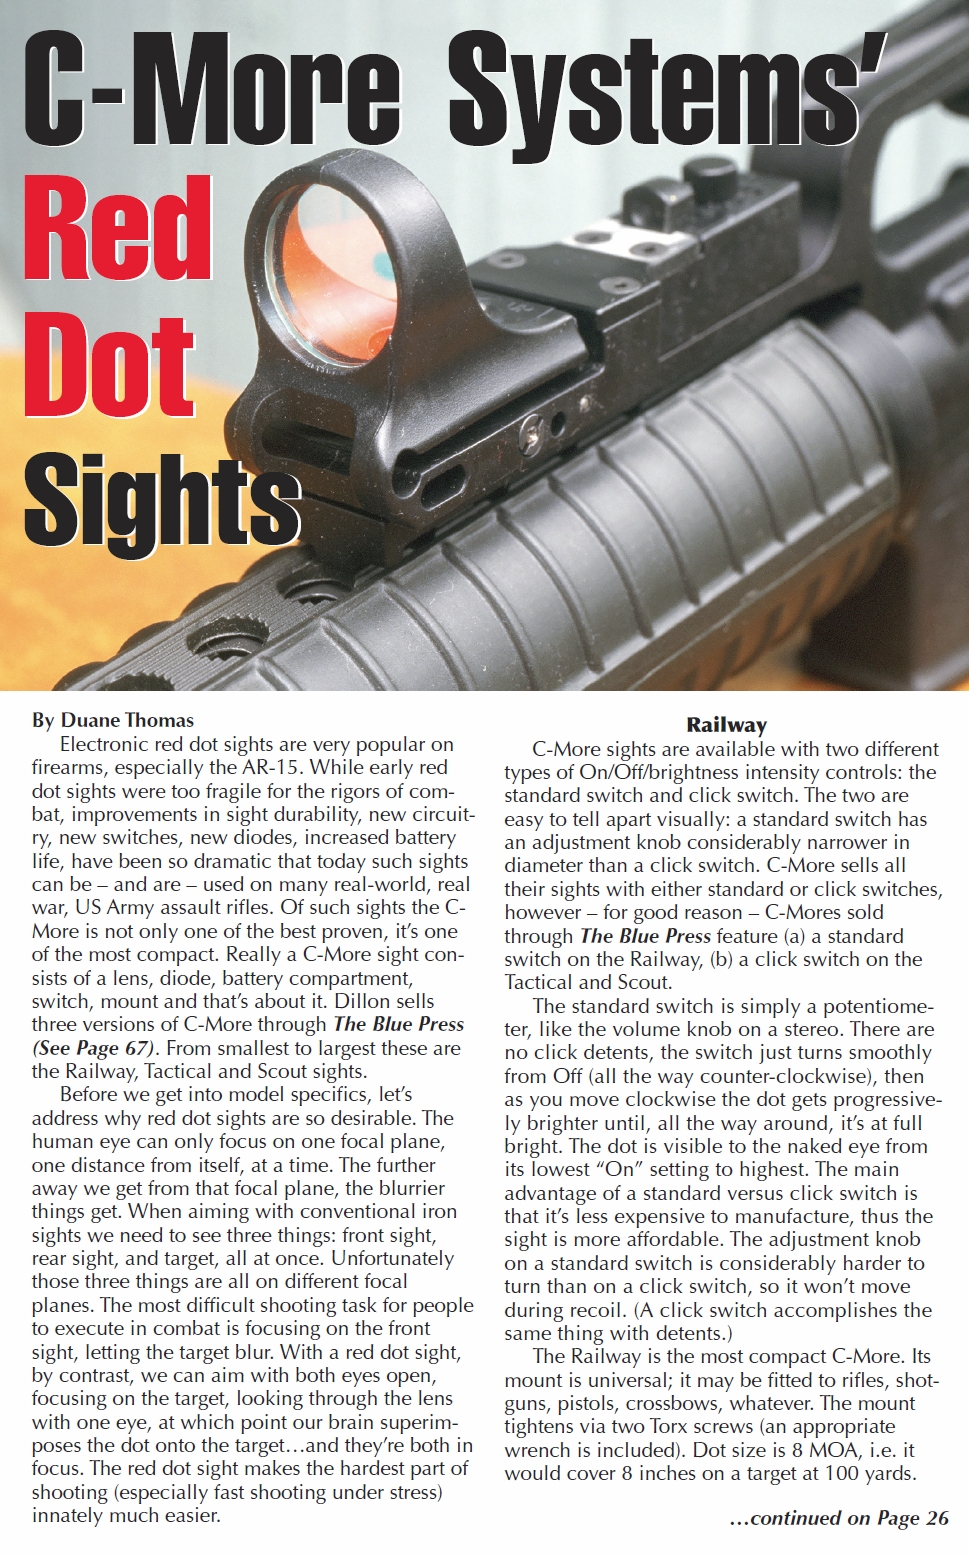 C-More Systems' Red Dot Sights page 1